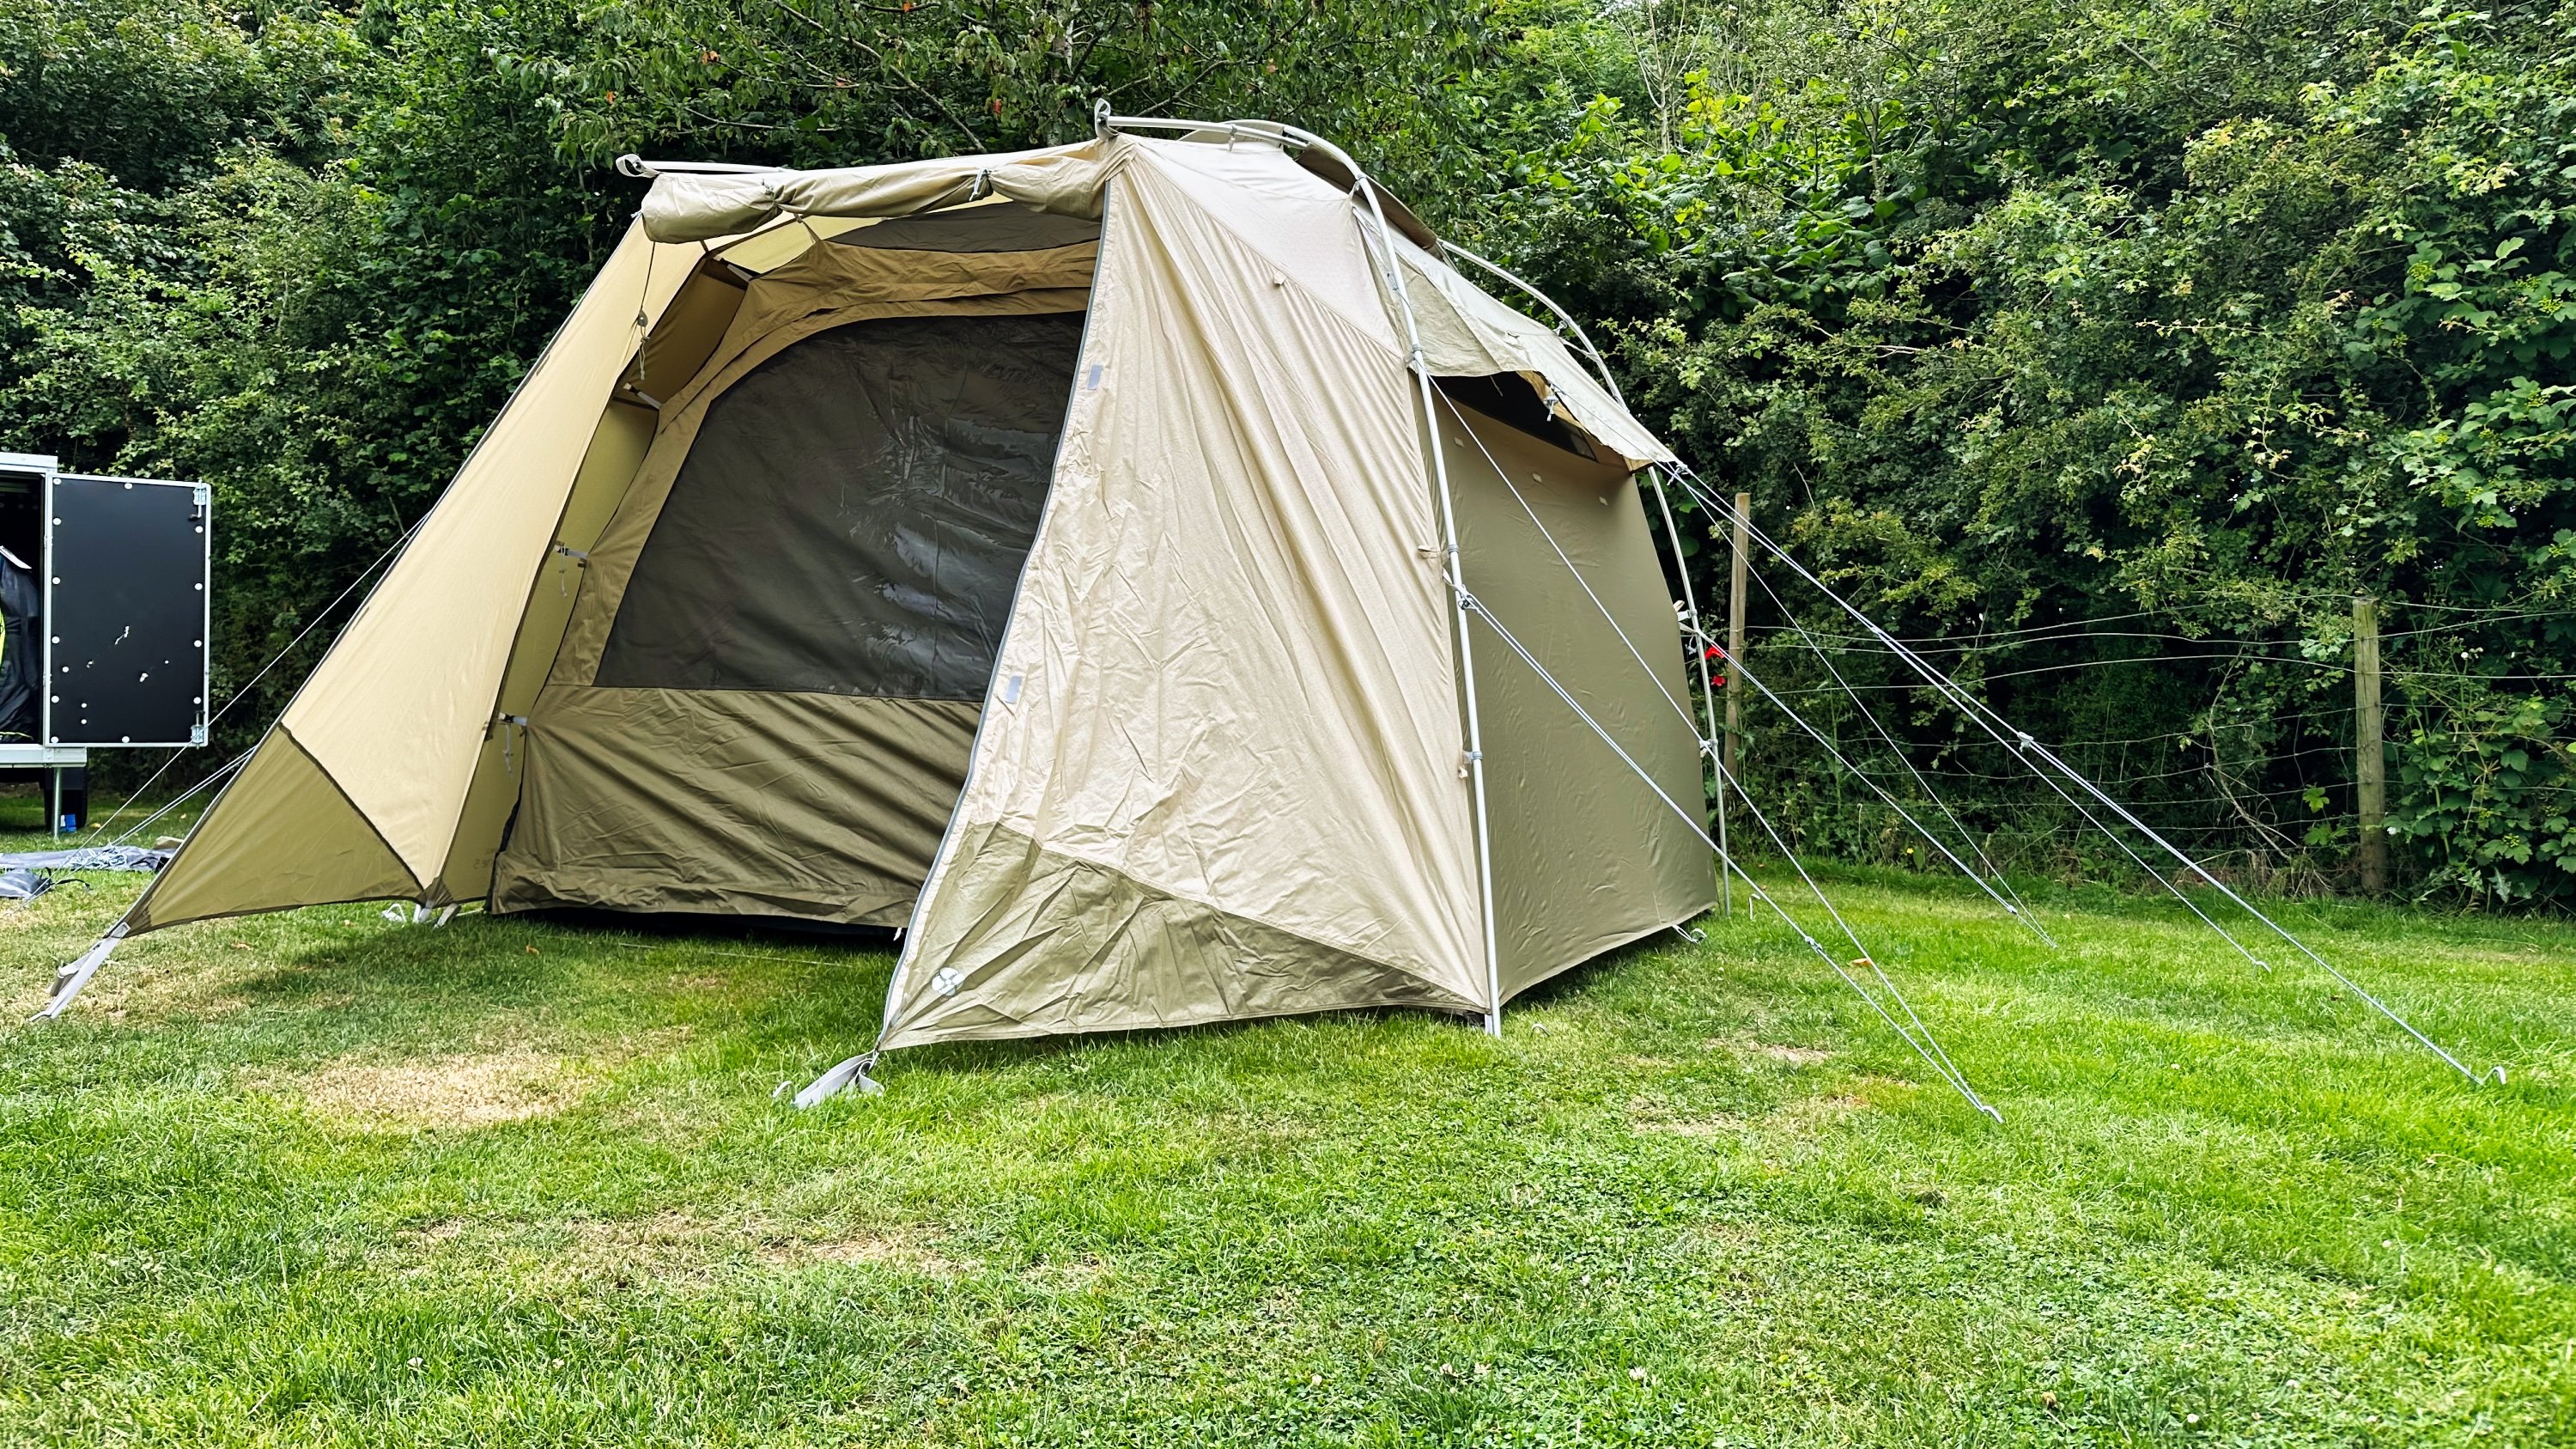 Tent pitched with the inner and inner does closed